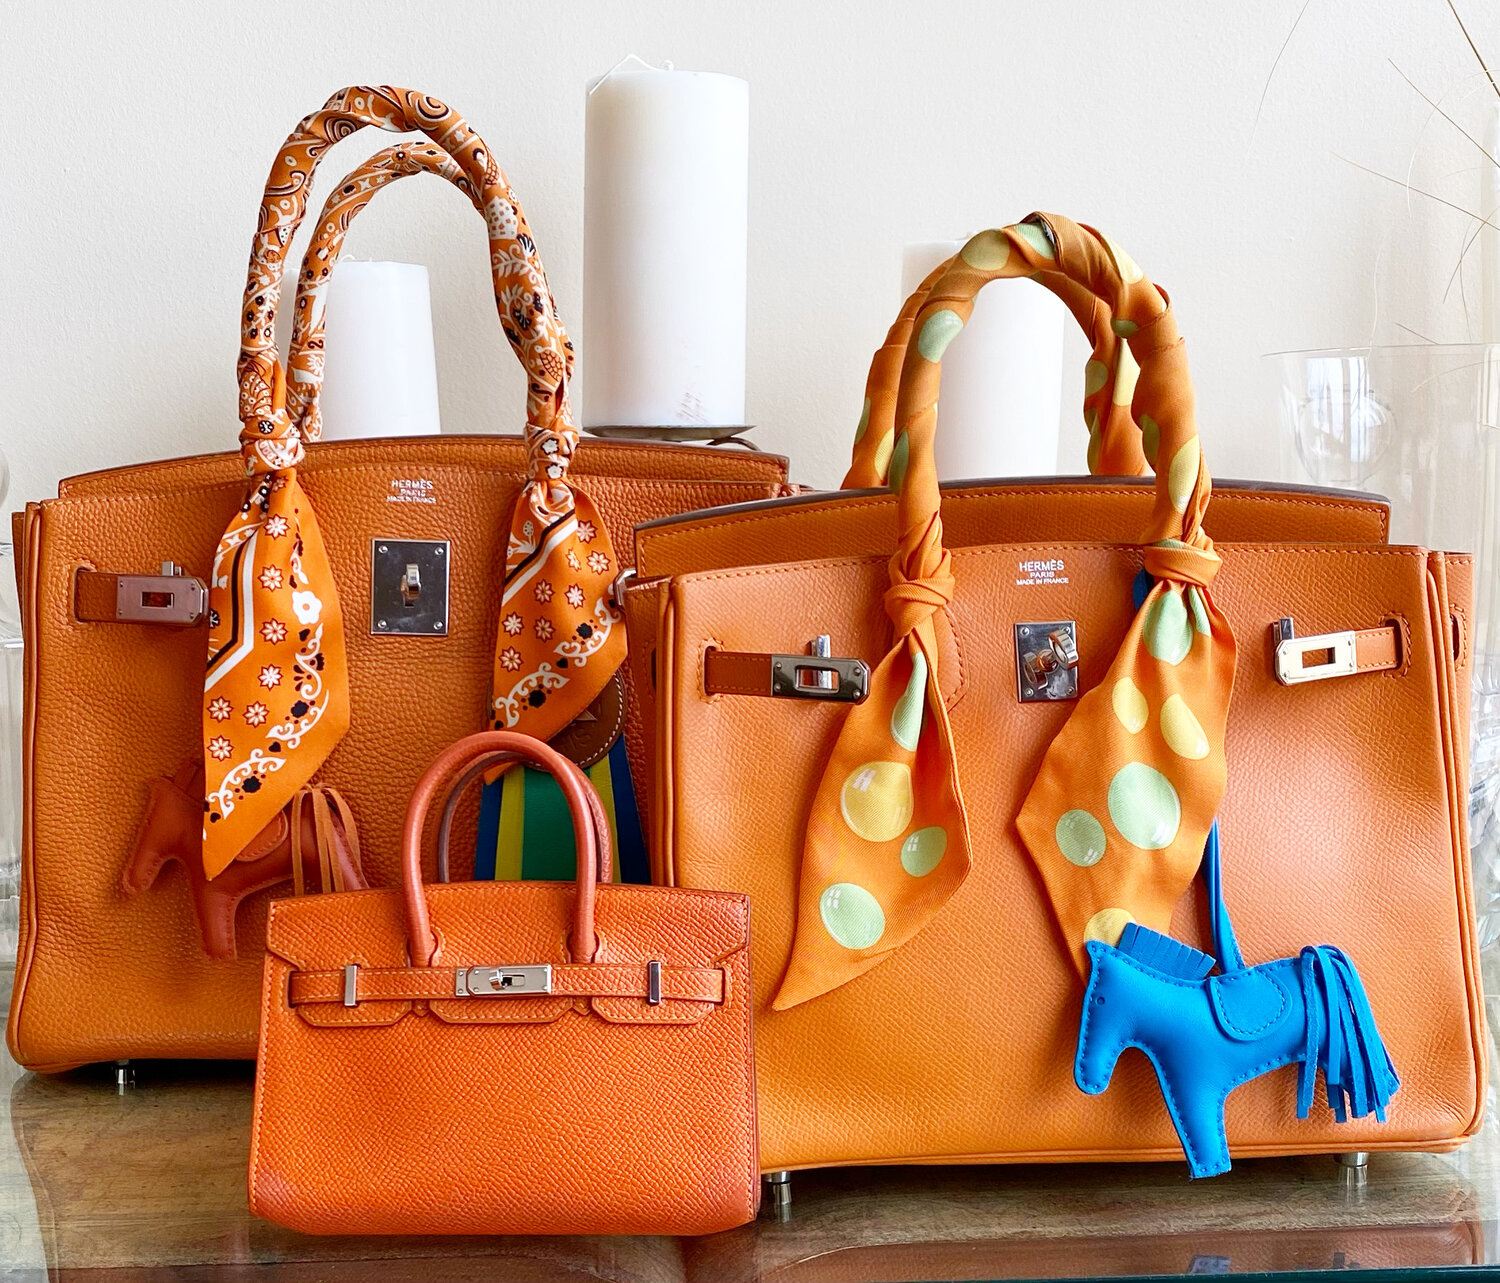 What's the Cheapest Hermes Bag? — Collecting Luxury